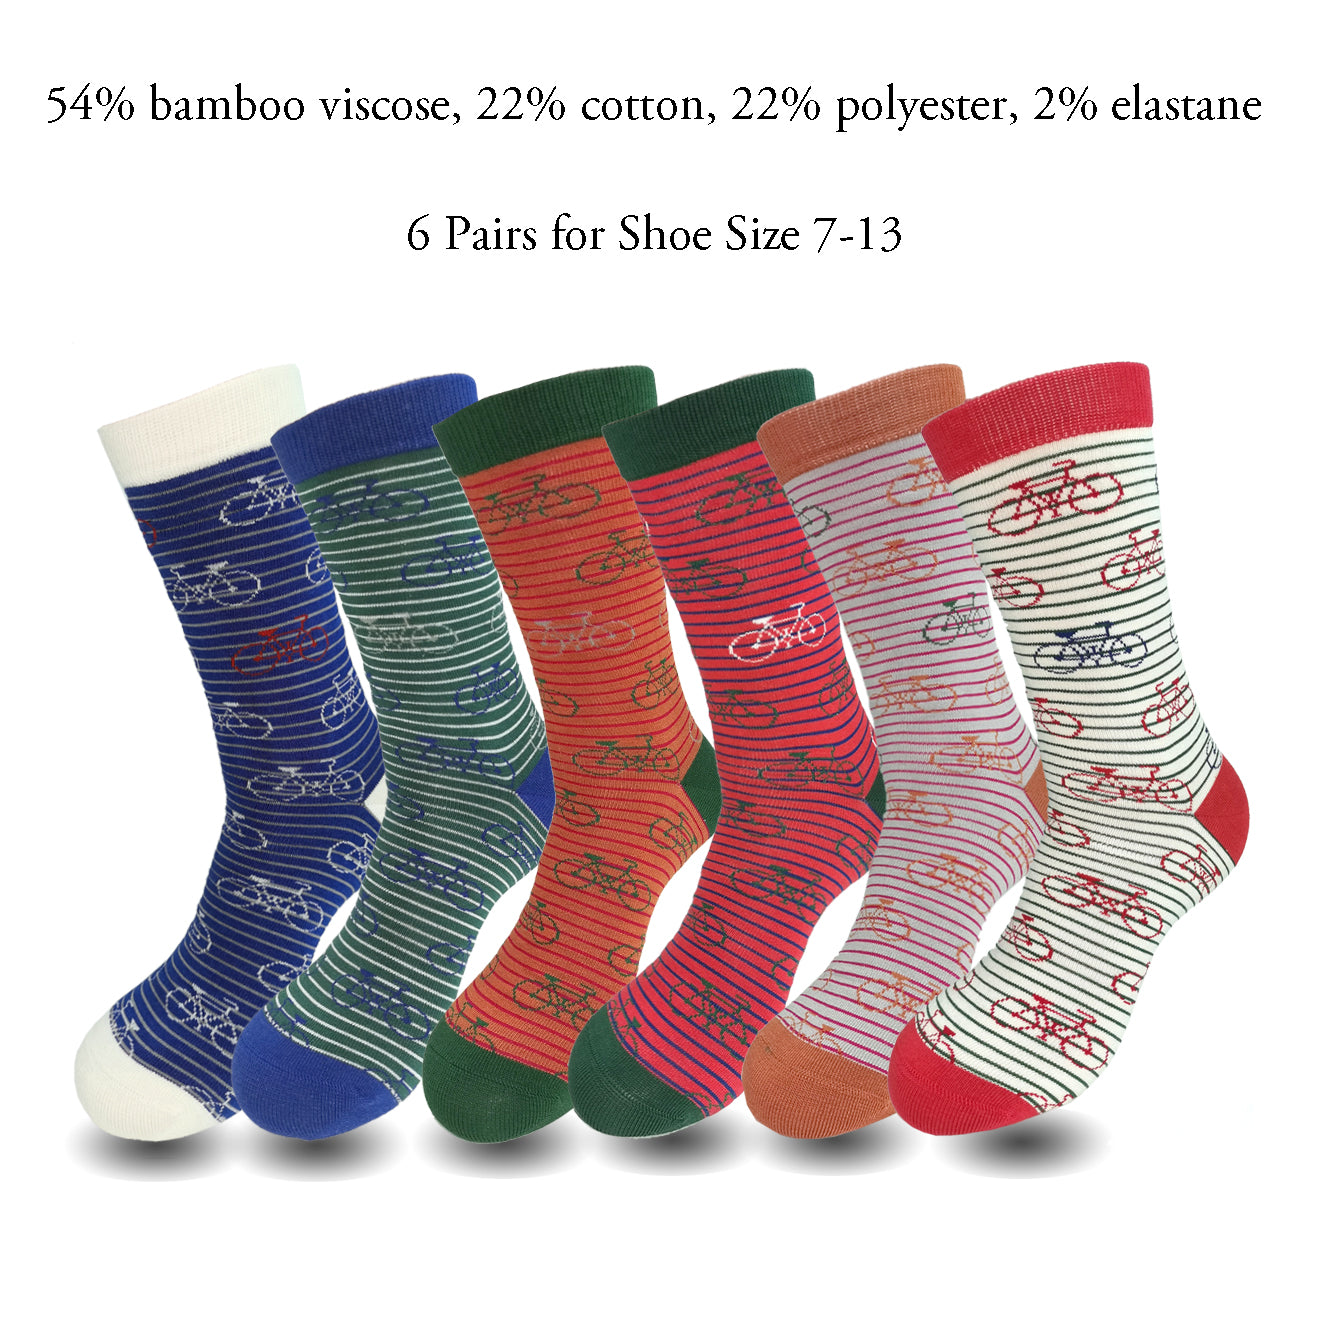 Lavencious Premium Soft and Comfort Bamboo Crew Socks for Men Shoe Size 7-13, 6 Pairs (Bicycle Striped)